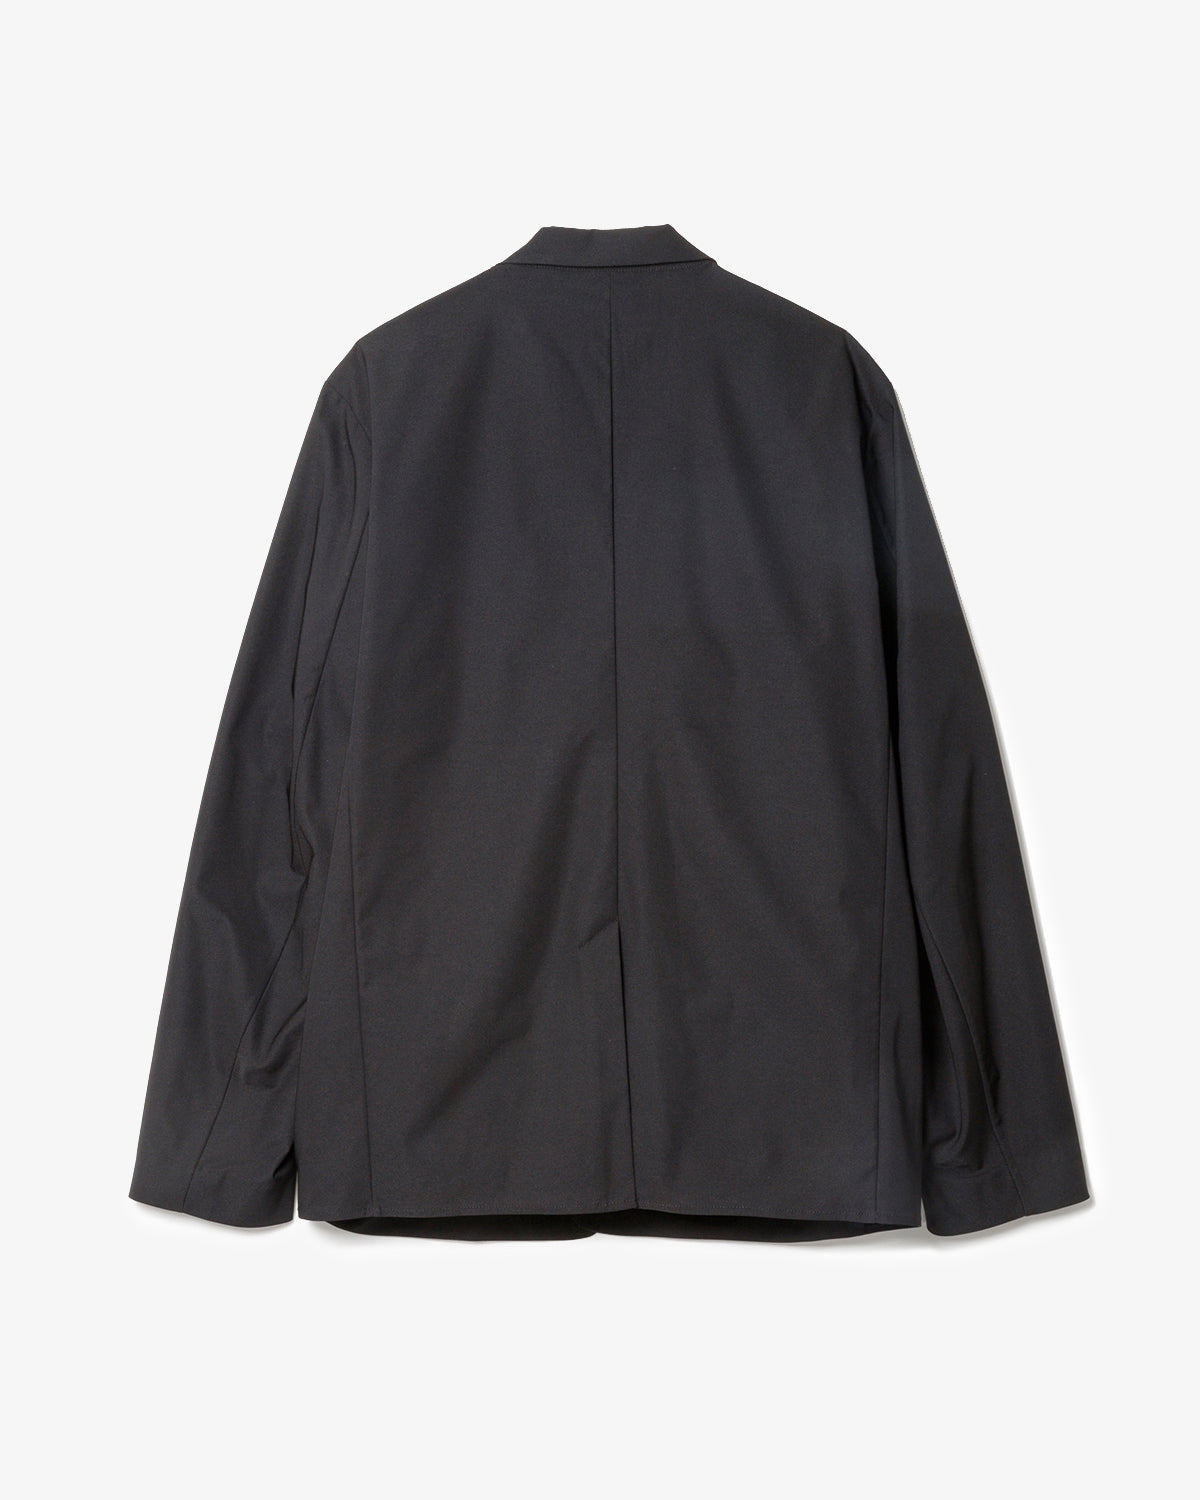 NEW NORMAL SOLOTEX® SUIT JACKET